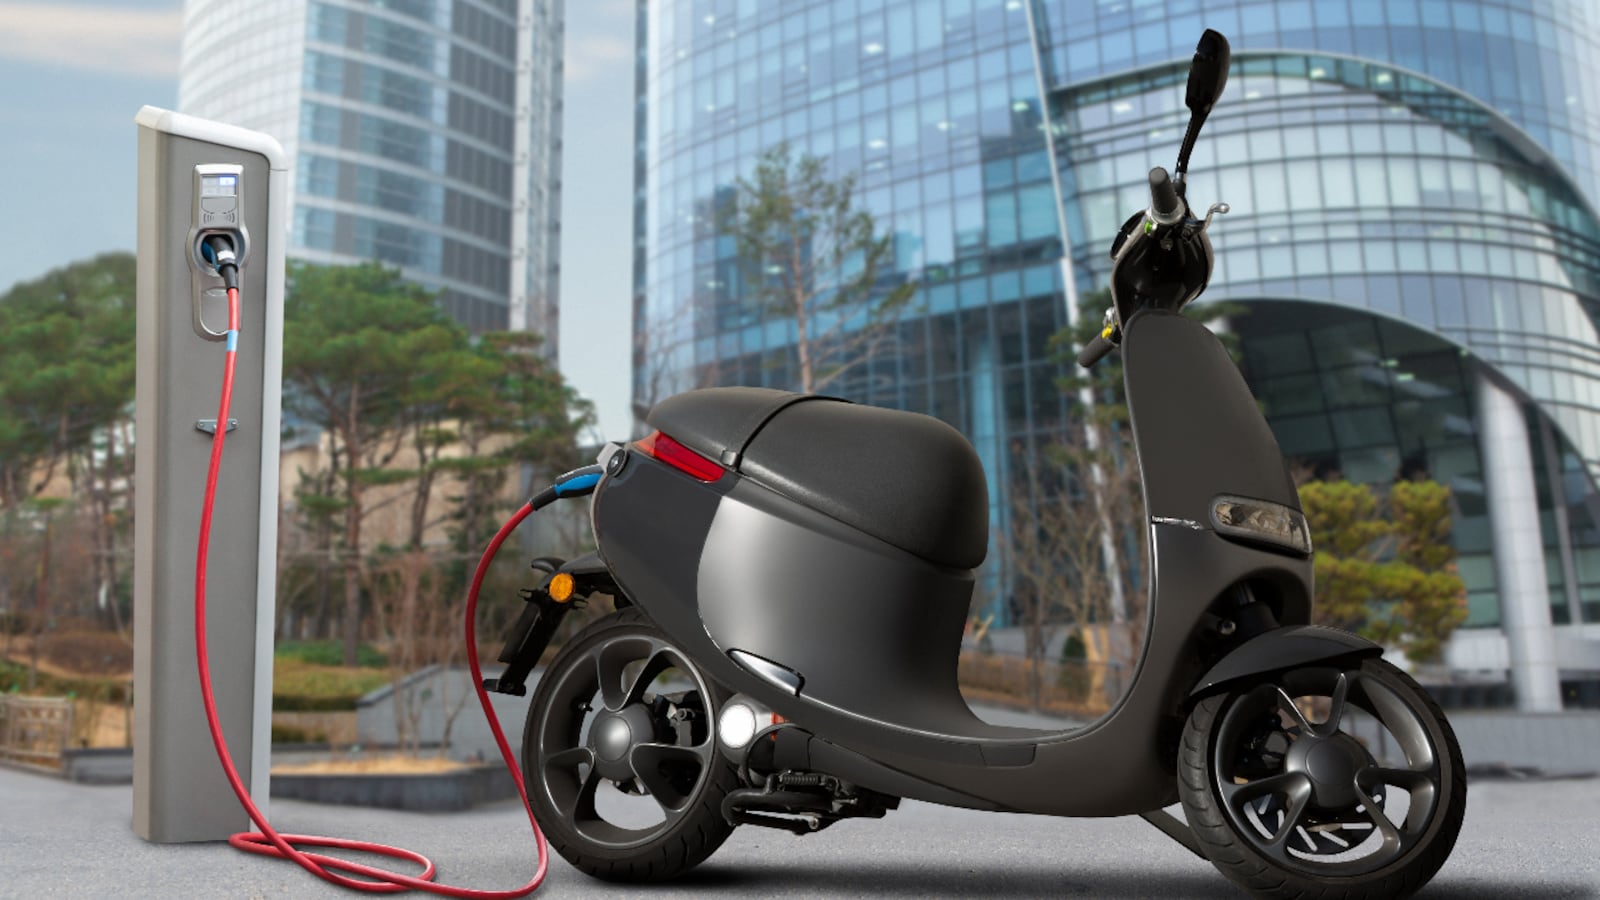 okaya launches electric scooter freedum at rs 69,900